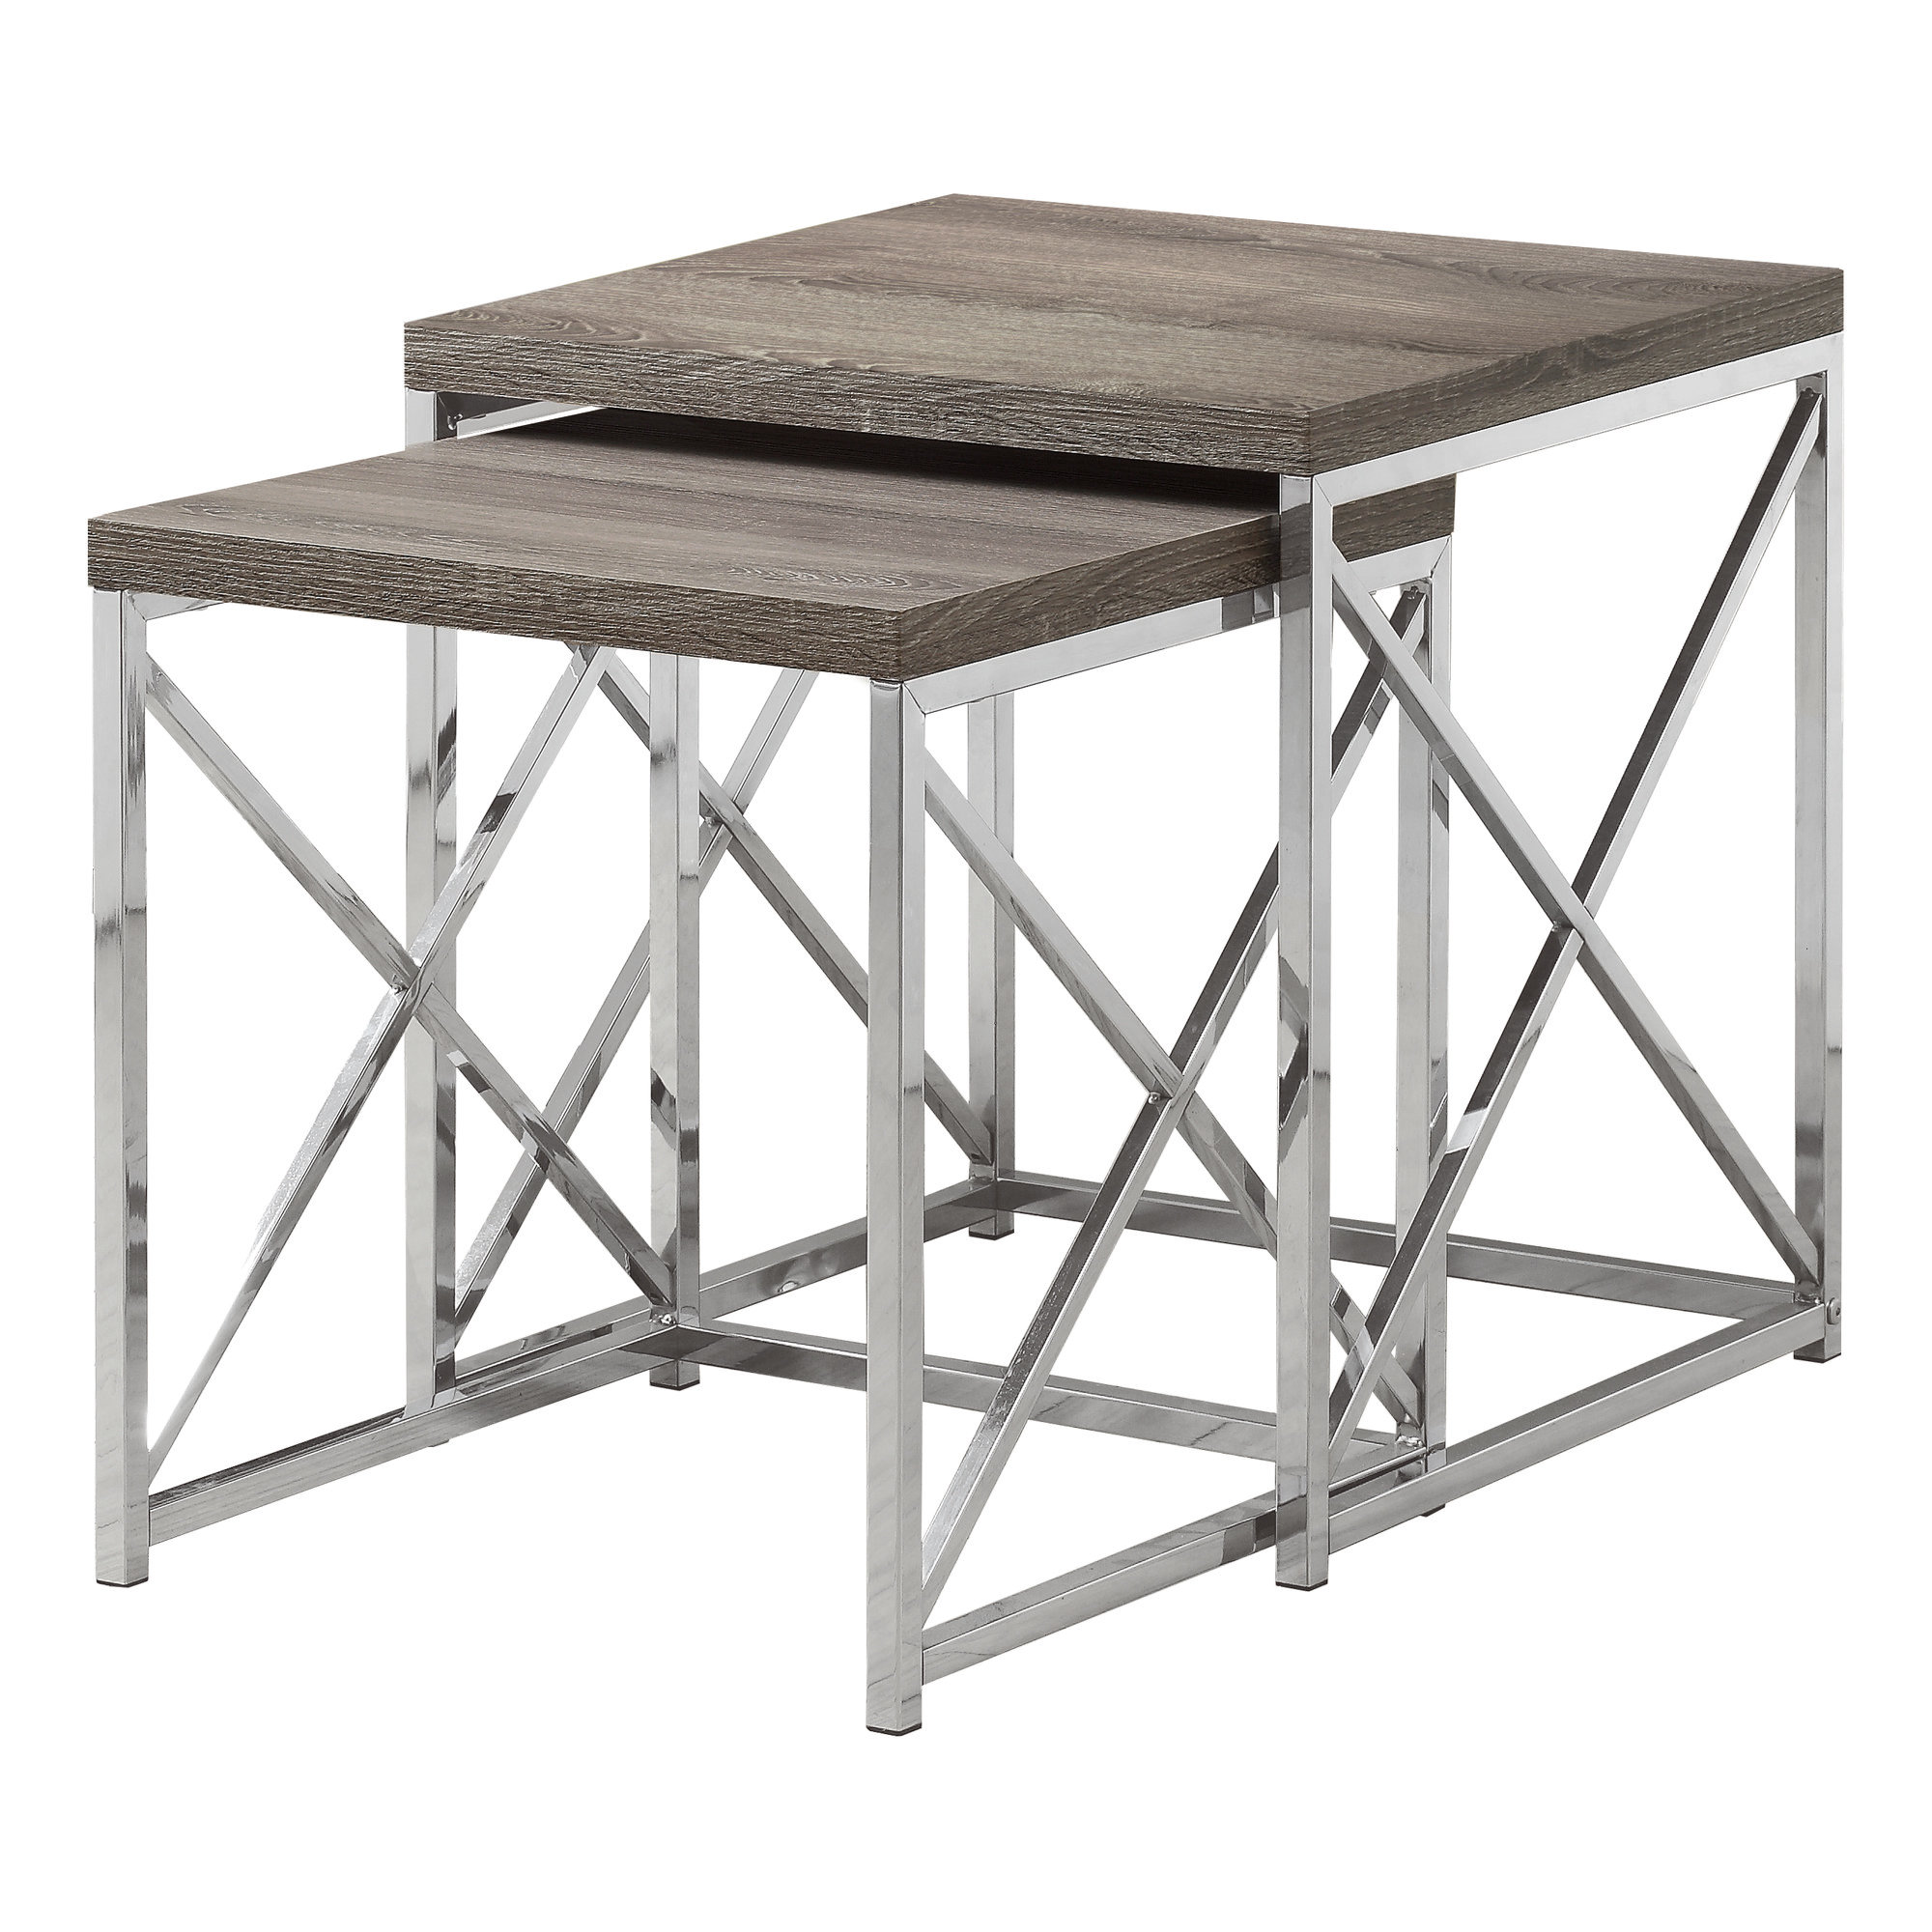 37.25" x 37.25" x 40.5" Dark Taupe Particle Board Metal 2pcs Nesting Table Set